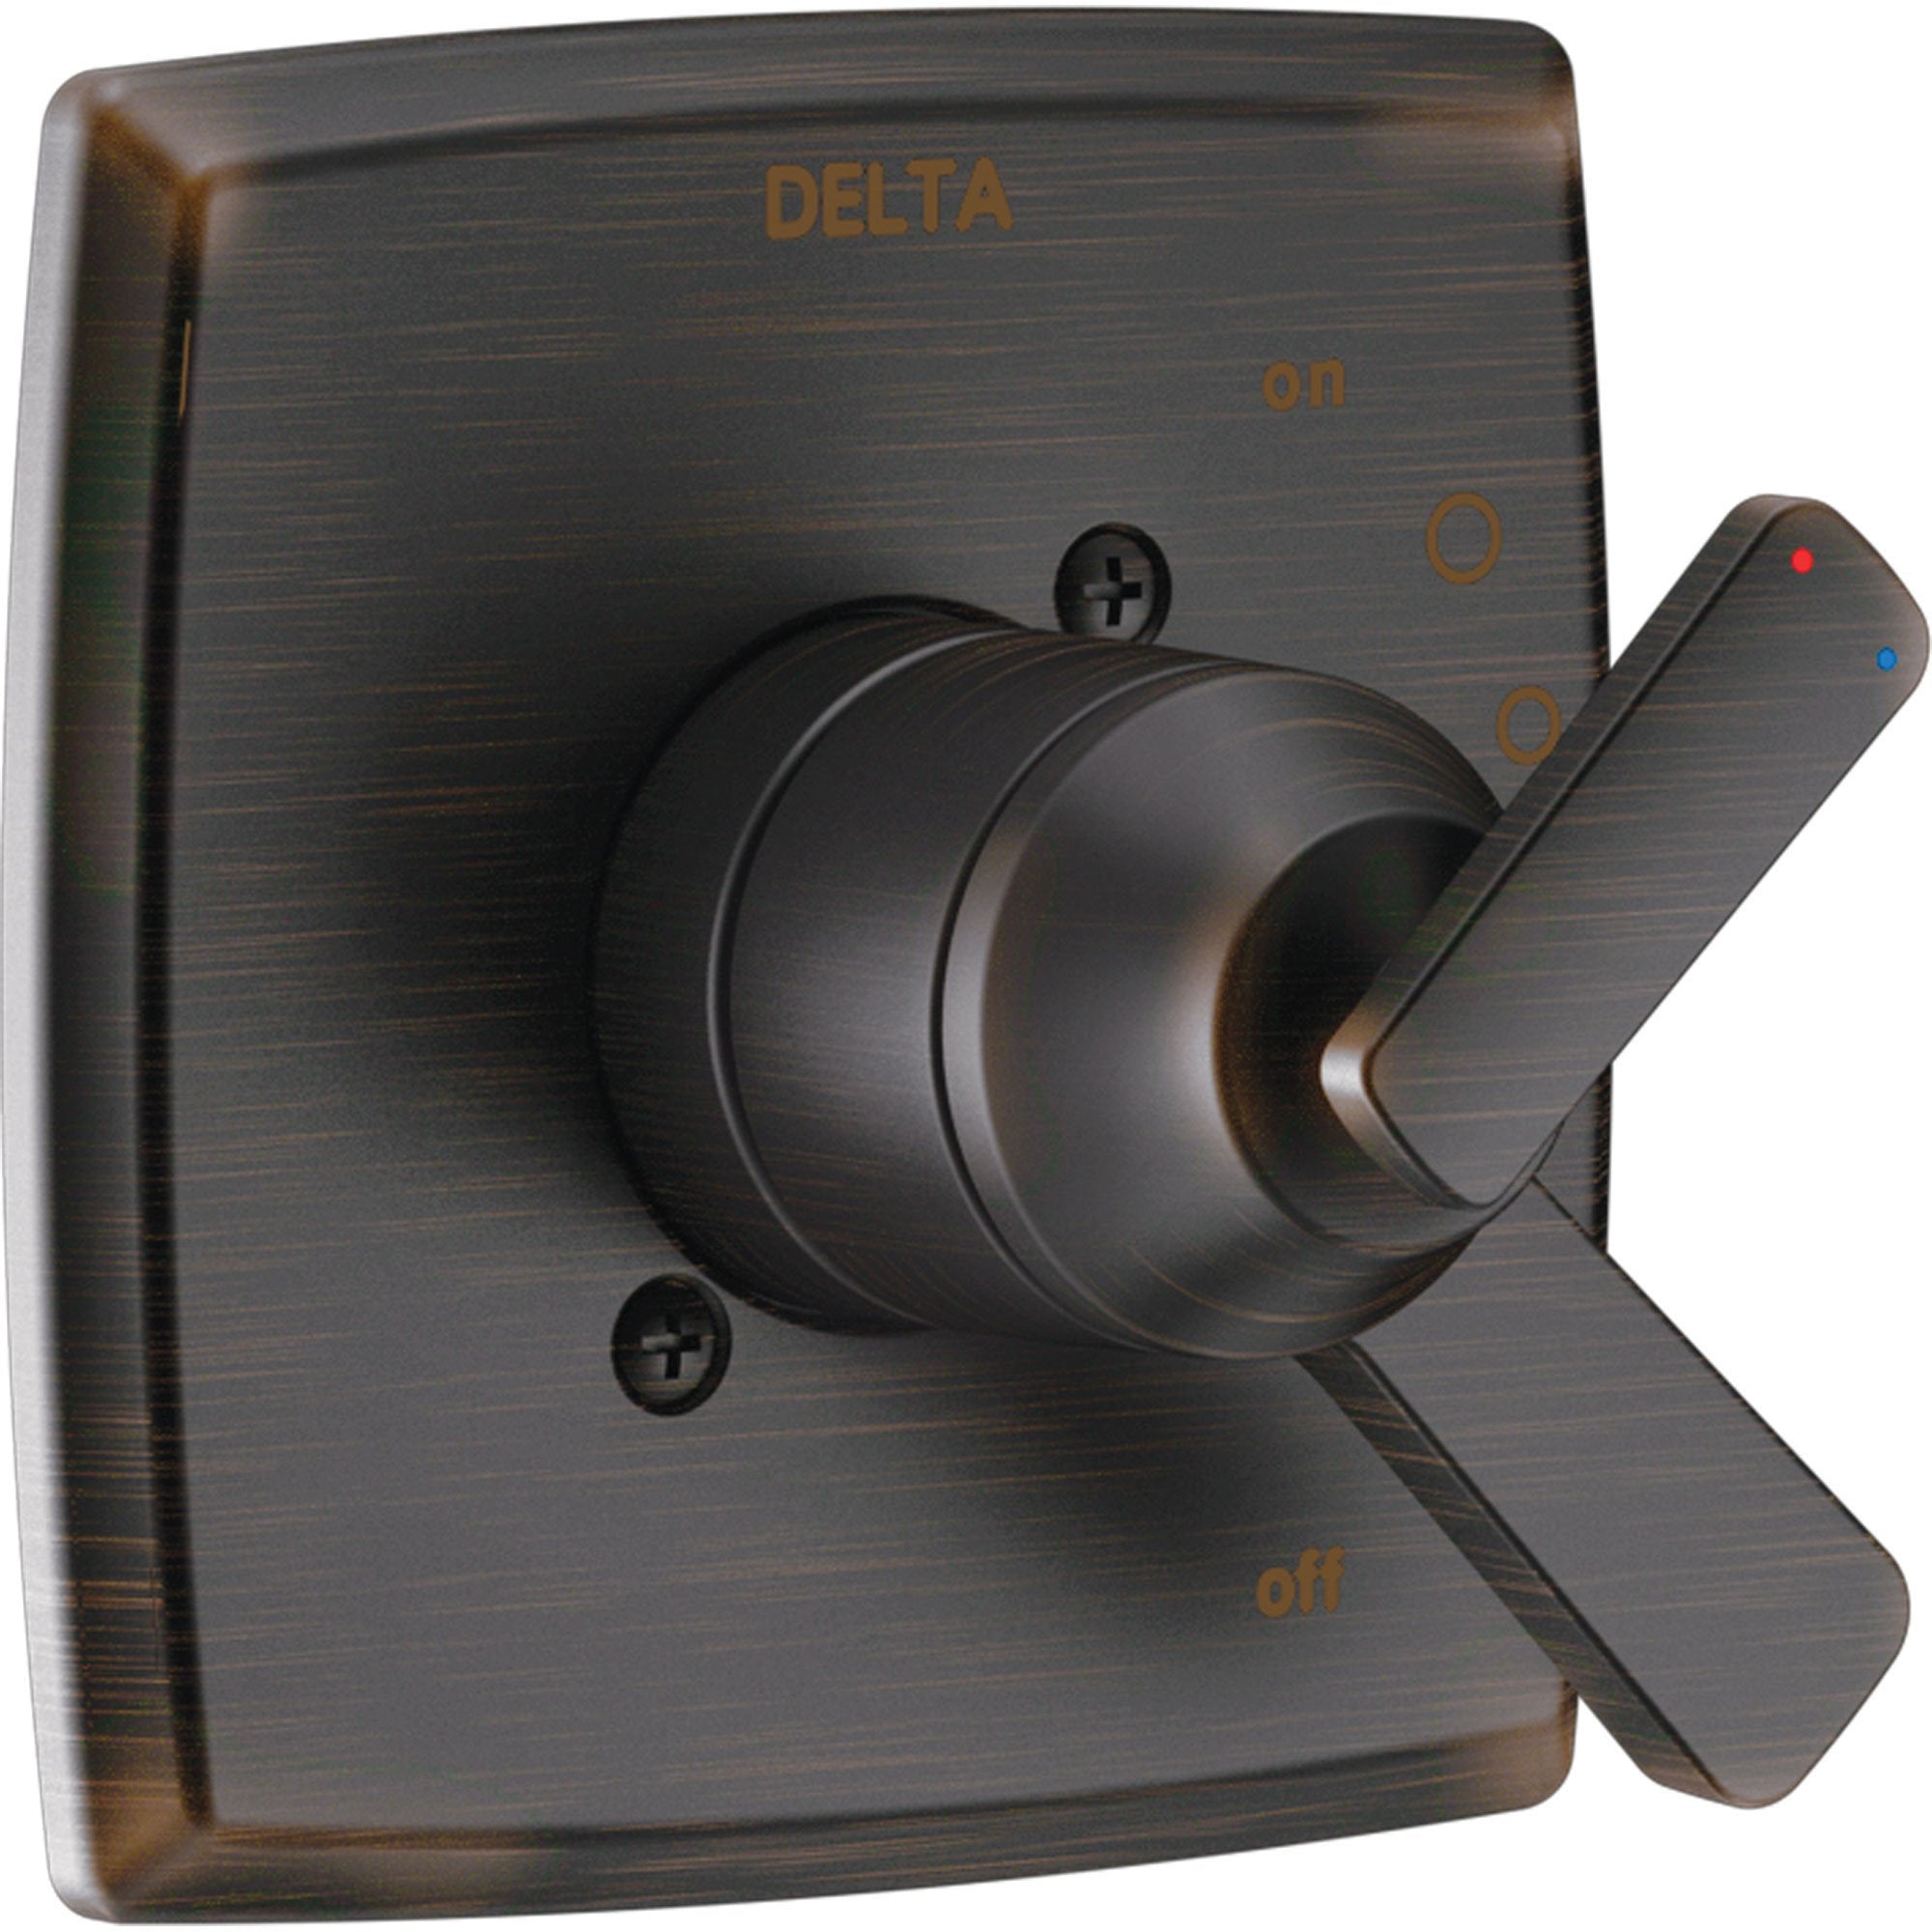 Delta Ashlyn Modern Venetian Bronze 17 Series Dual Temperature and Pressure Shower Faucet Control INCLUDES Rough-in Valve with Stops D1155V